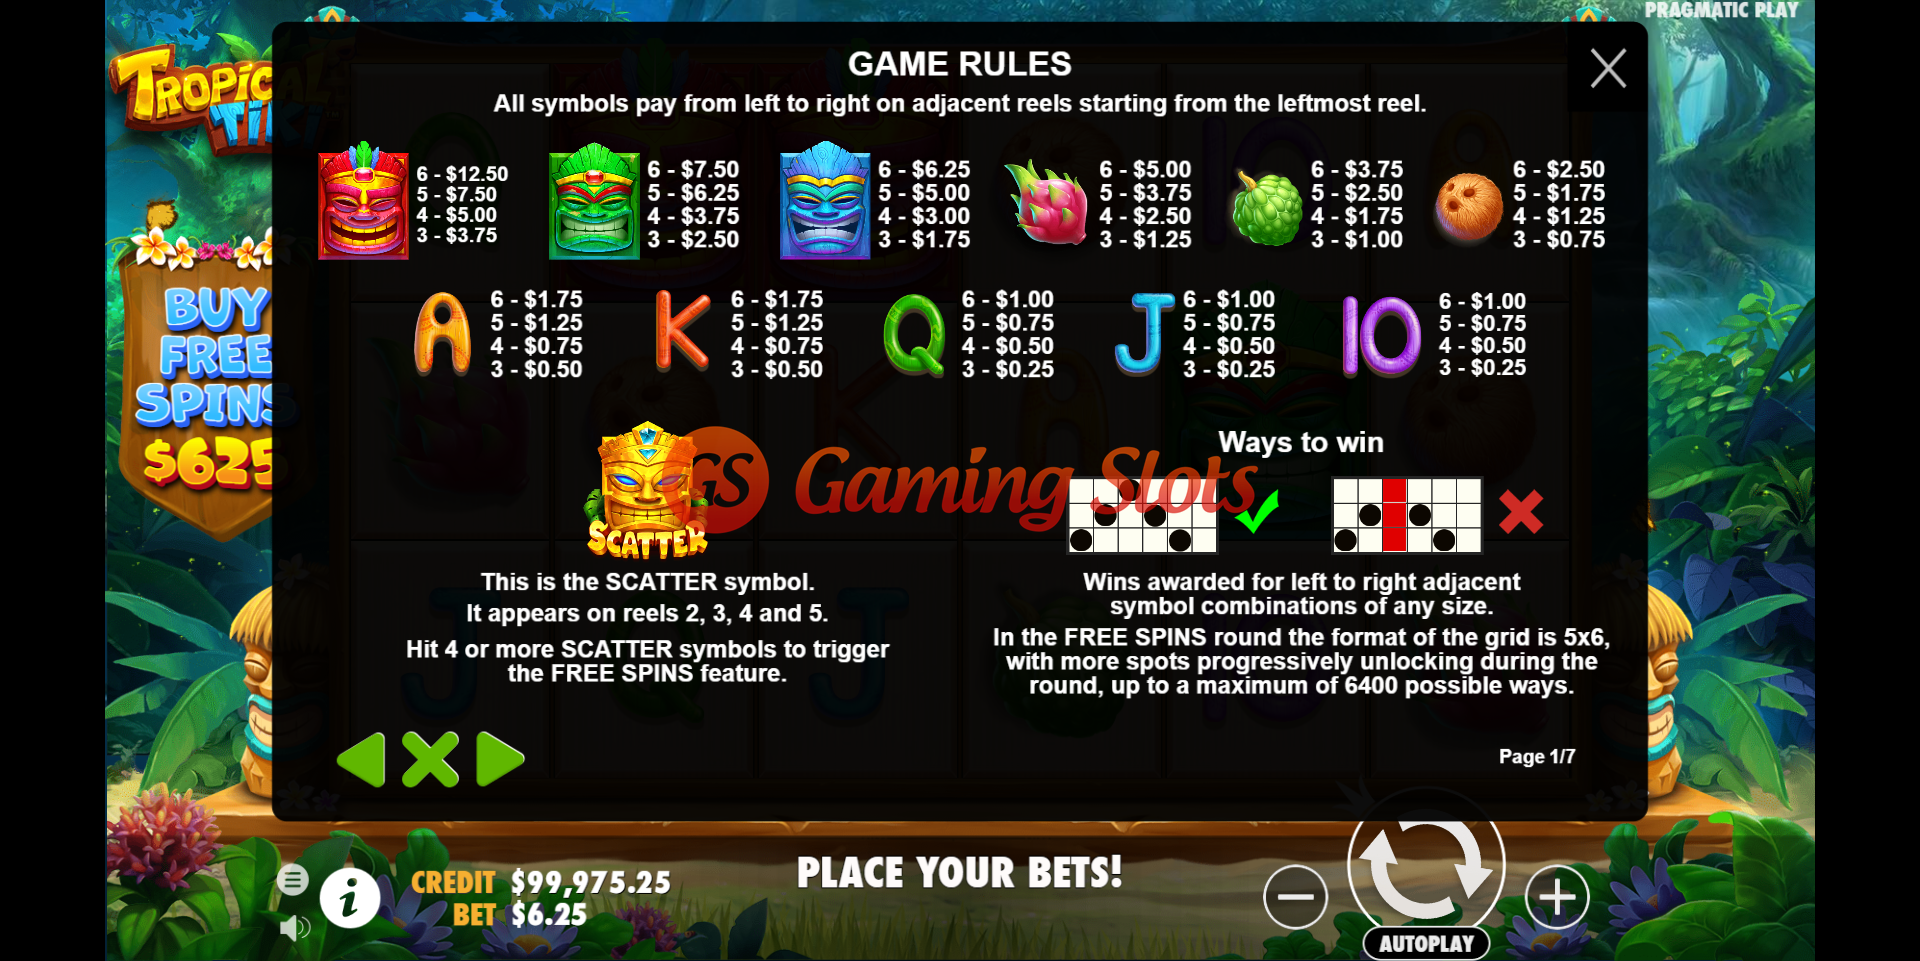 Game Rules for Tropical Tiki slot from Pragmatic Play